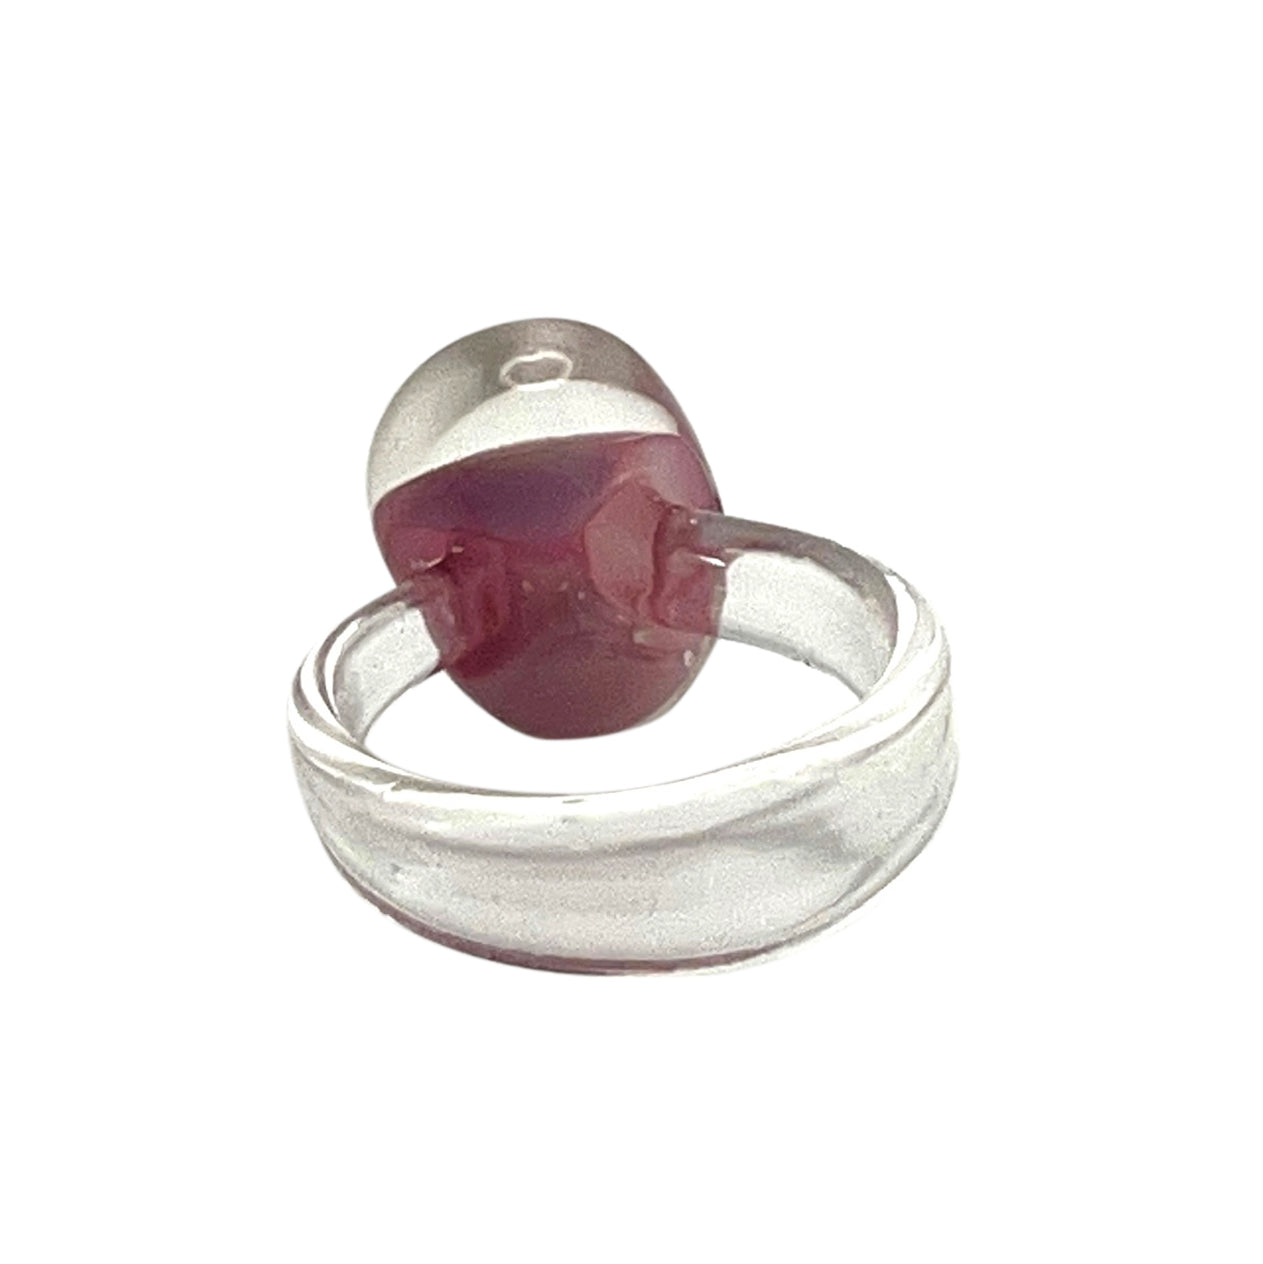 Pinky Jelly Bean Ring